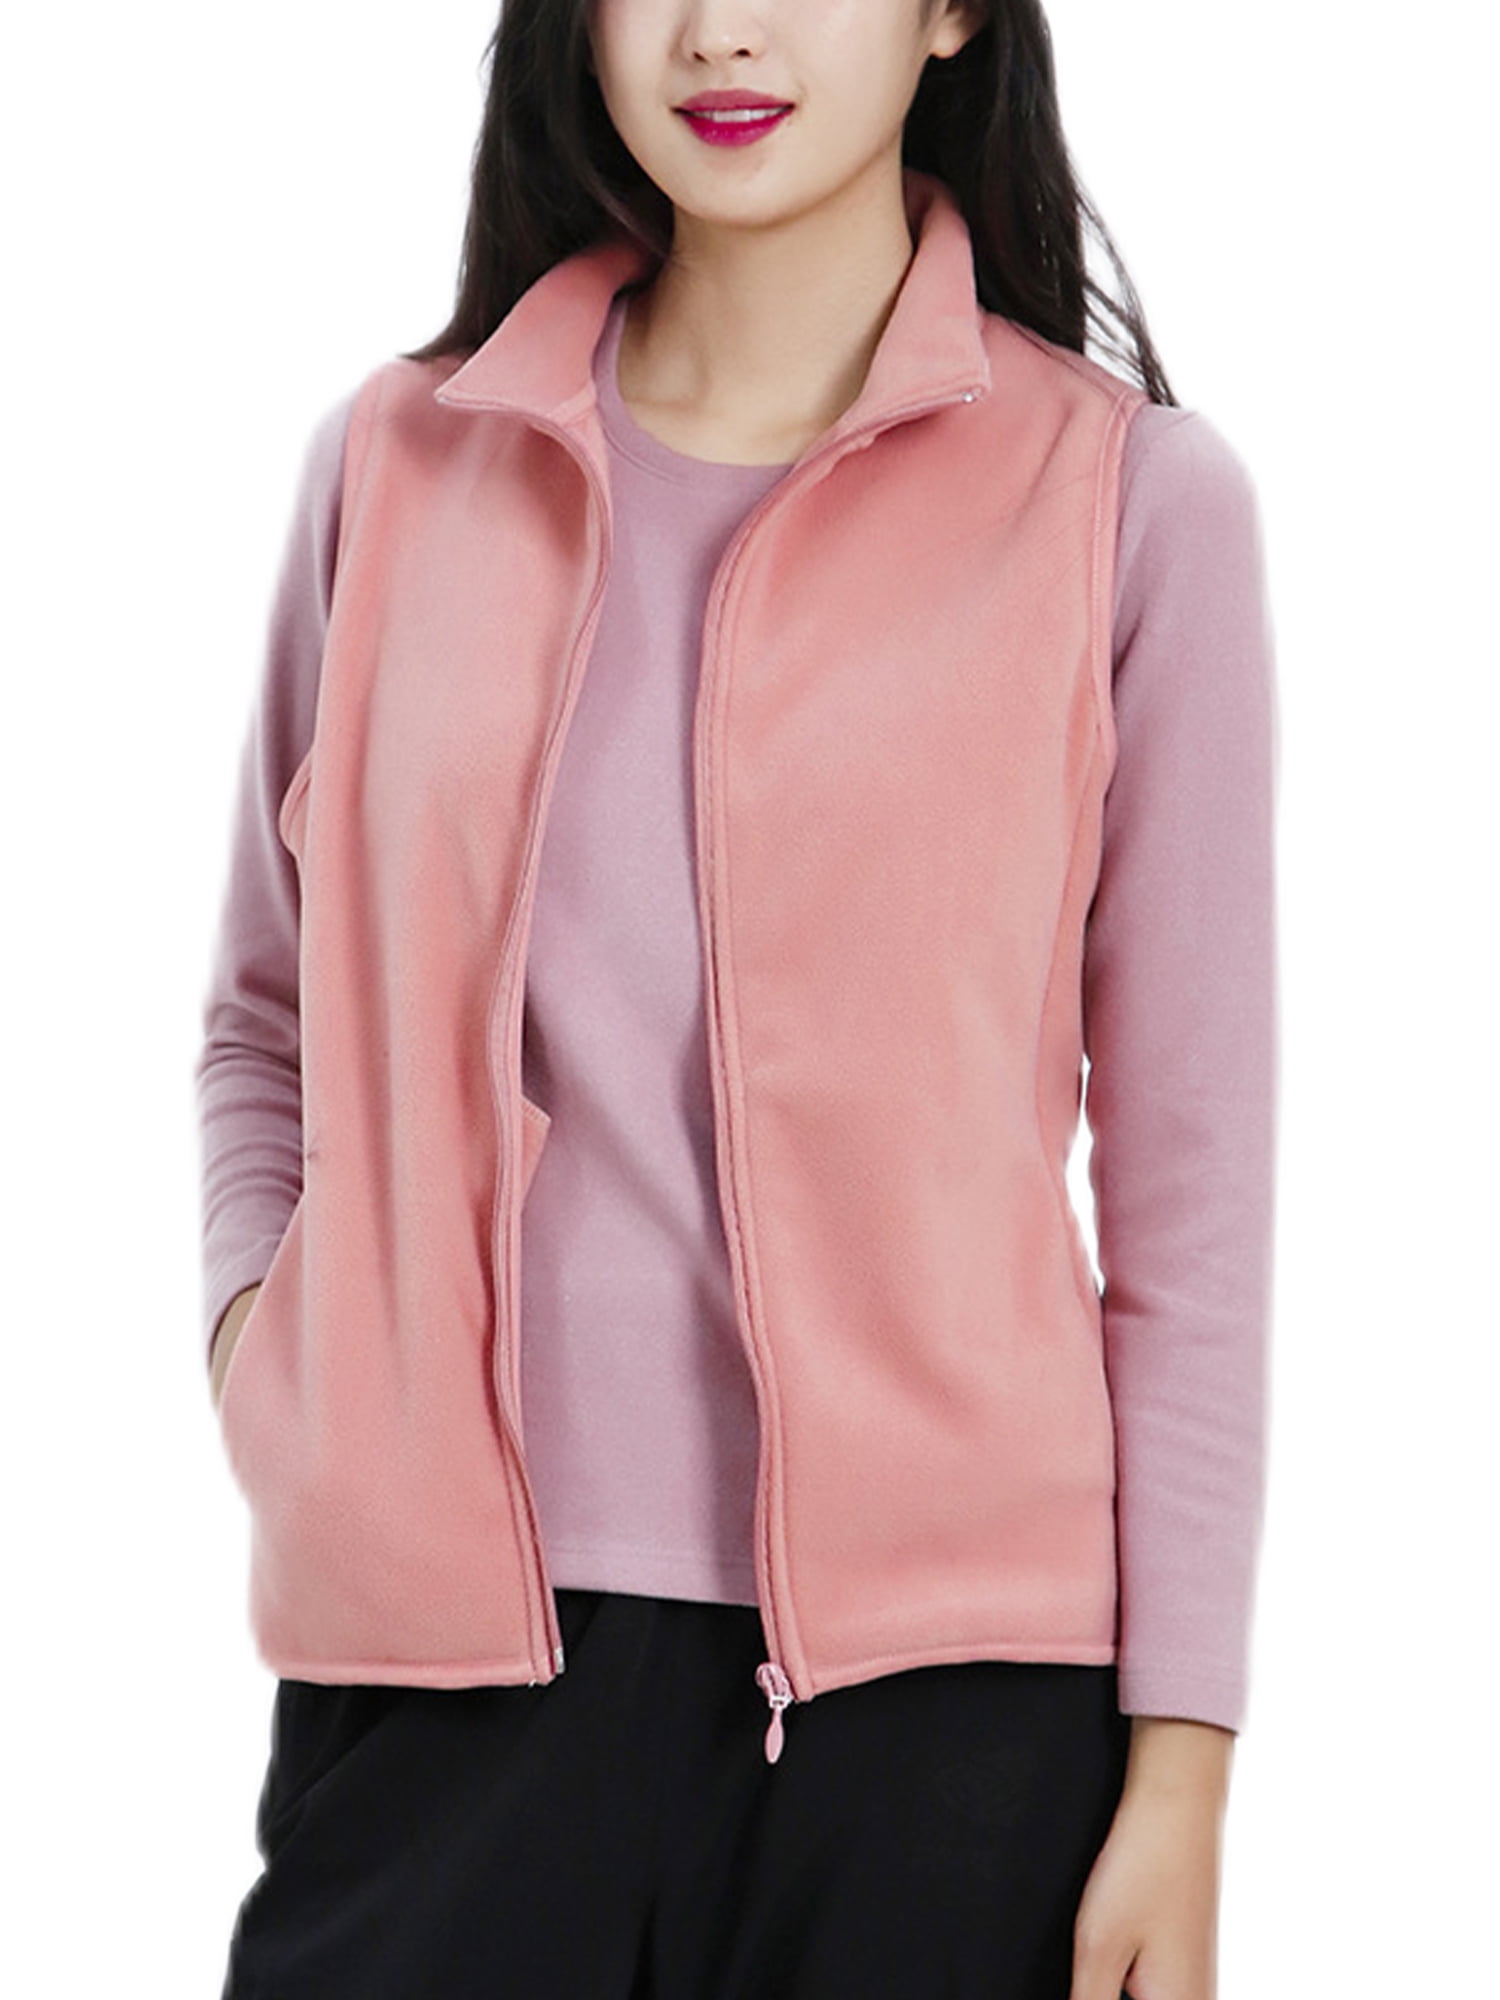 Lumento Ladies Cardigan Holiday Outwear Loose Zip-Up Jacket Vest Casual  Solid Color Waistcoat With Pockets Orange Pink 12